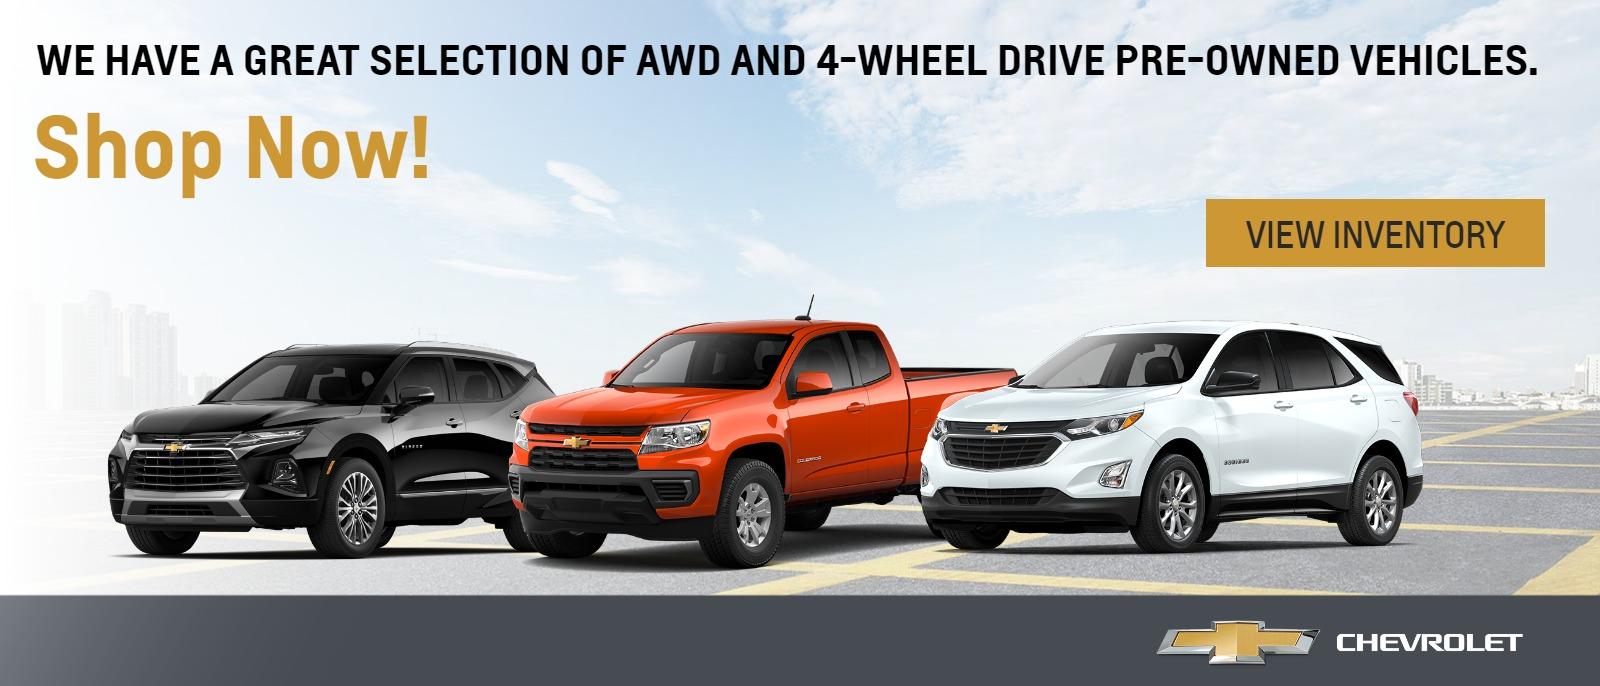 WE HAVE GREAT SELECTION OF AWD AND 4-WHEEL DRIVE PRE-OWNED VEHICLES.